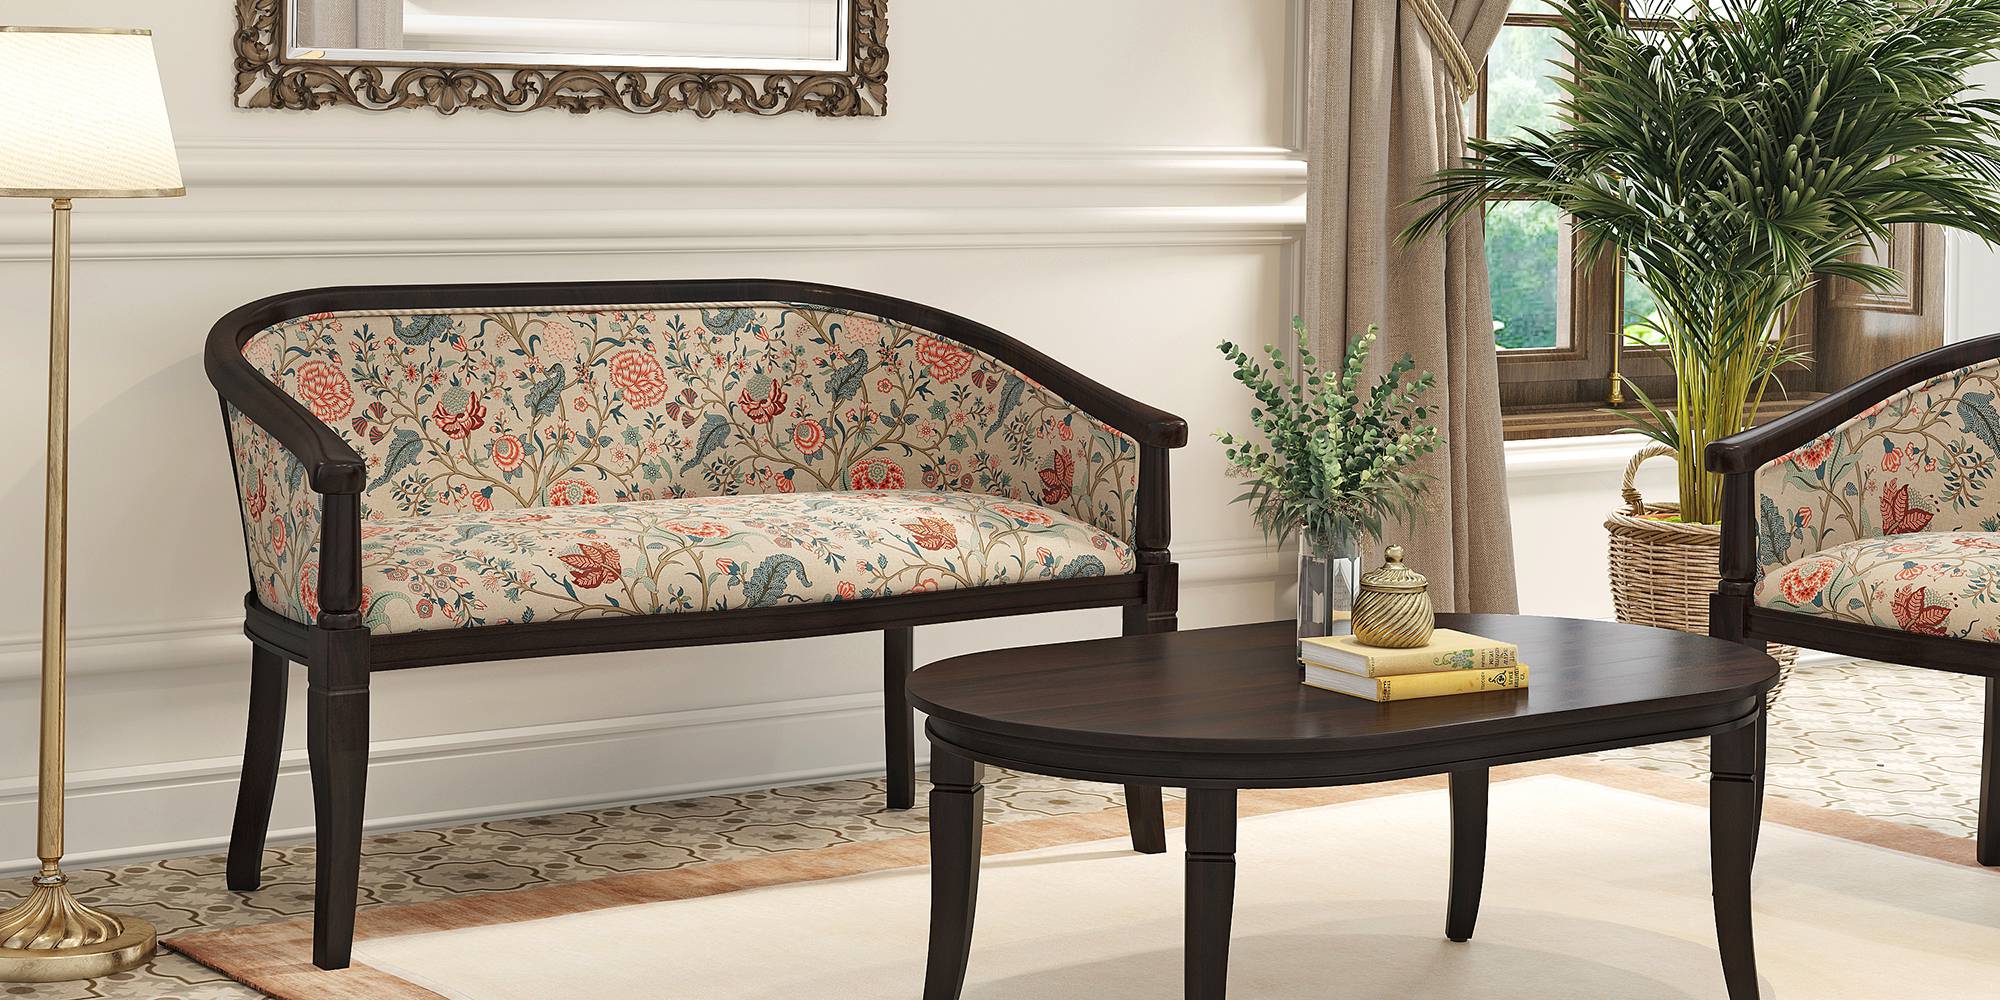 Florence Wooden Sofa -  Finish Mahogany (Calico Floral) by Urban Ladder - - 